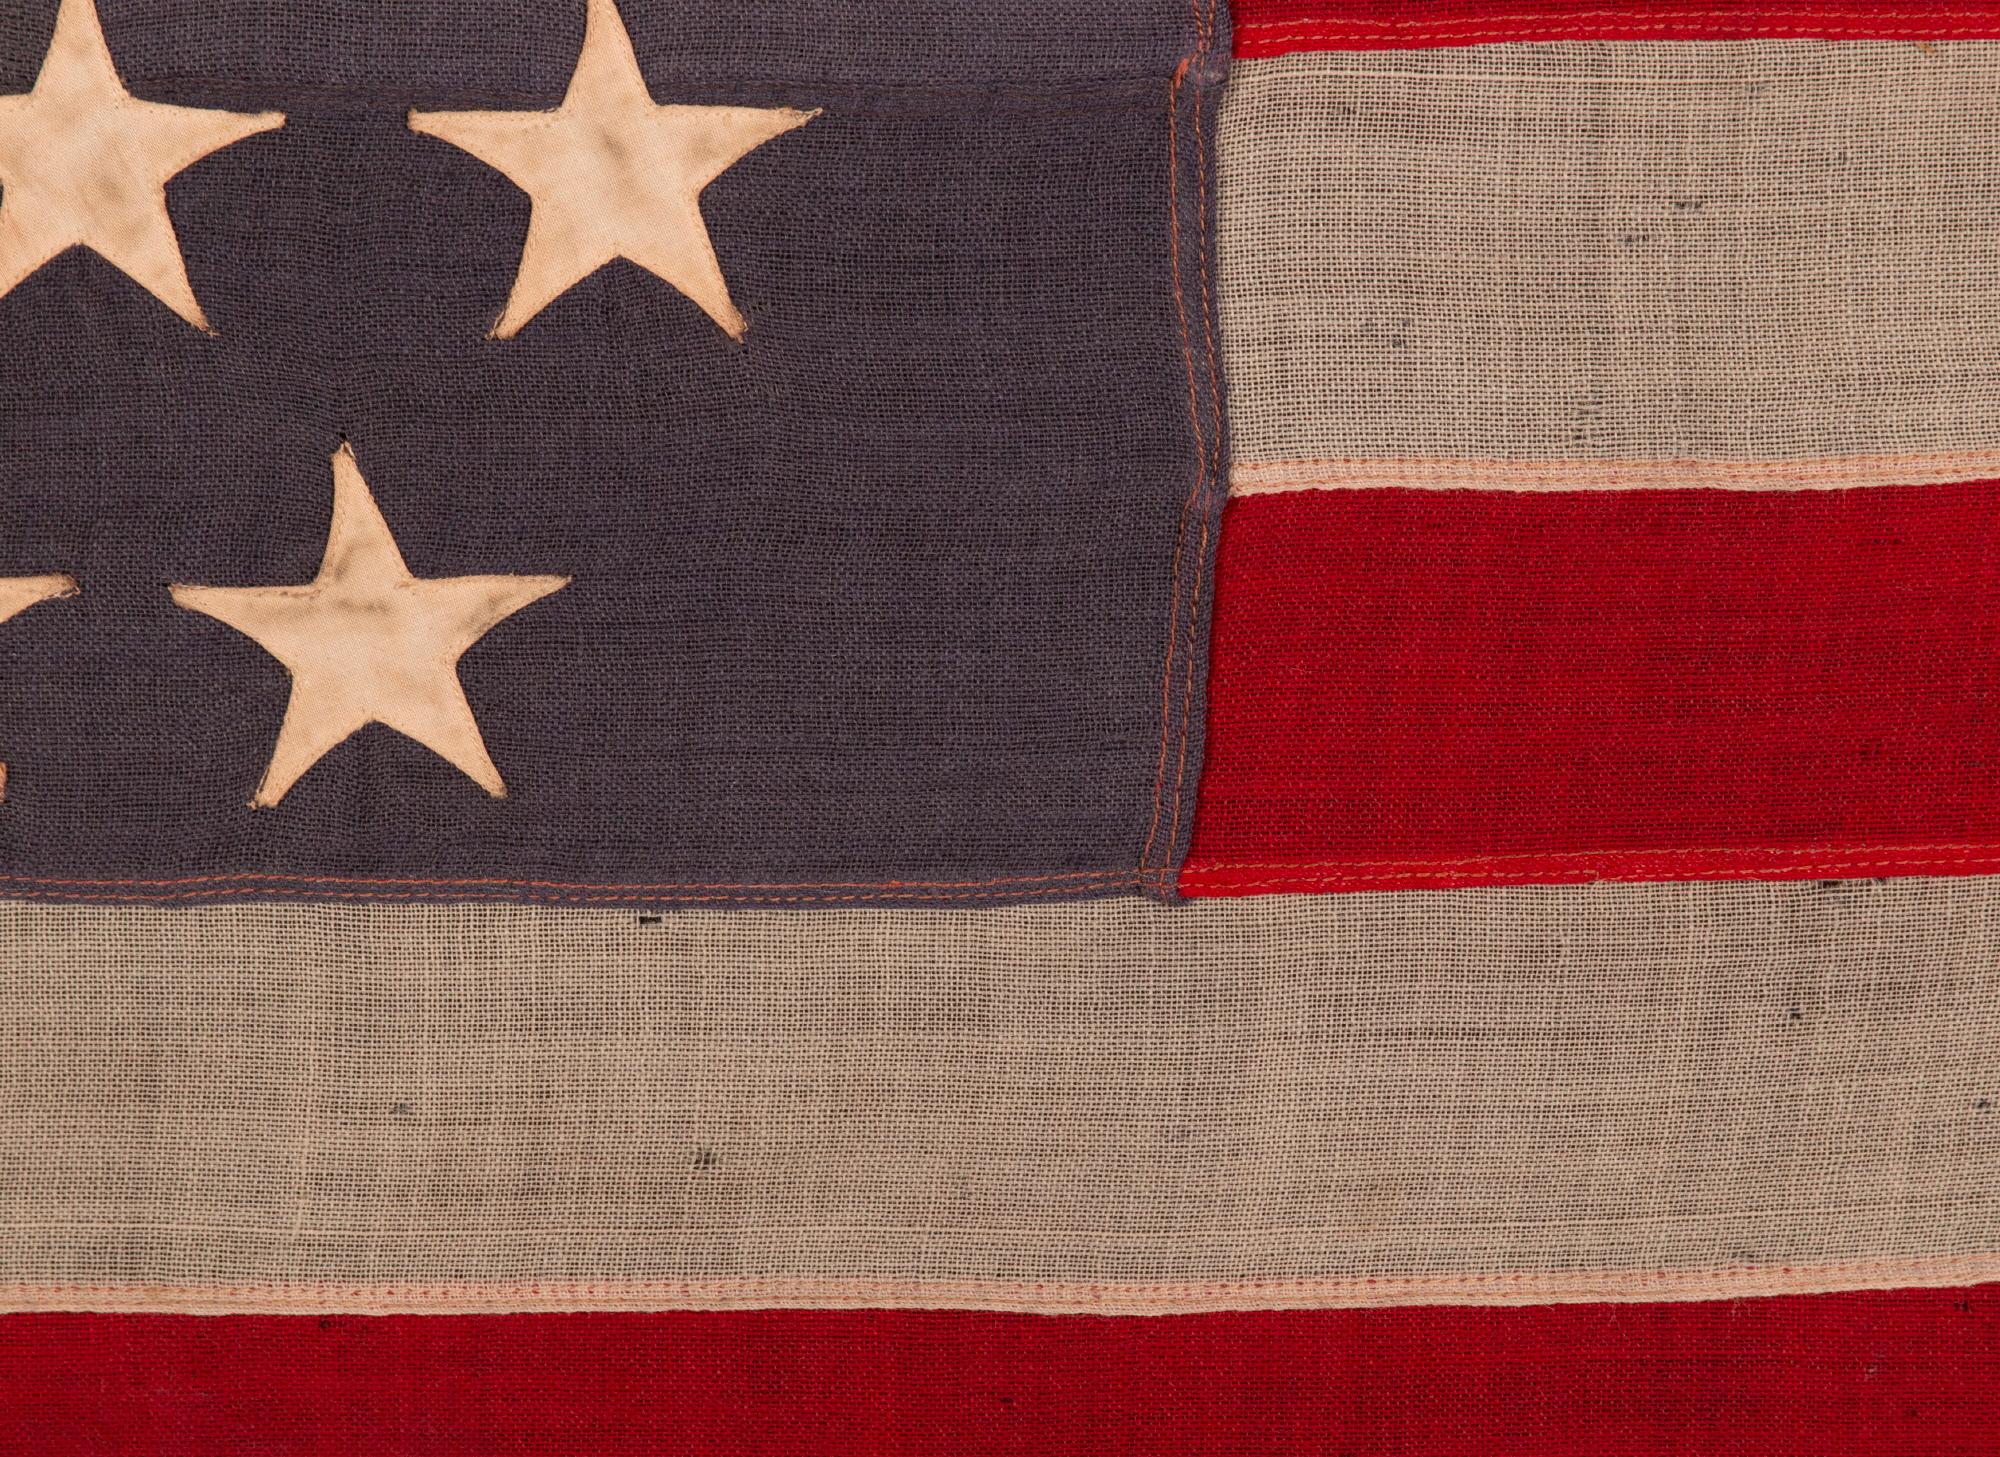 Late 19th Century 45 Star Antique American Flag, with Staggered Rows, Utah Statehood, ca 1890-1896